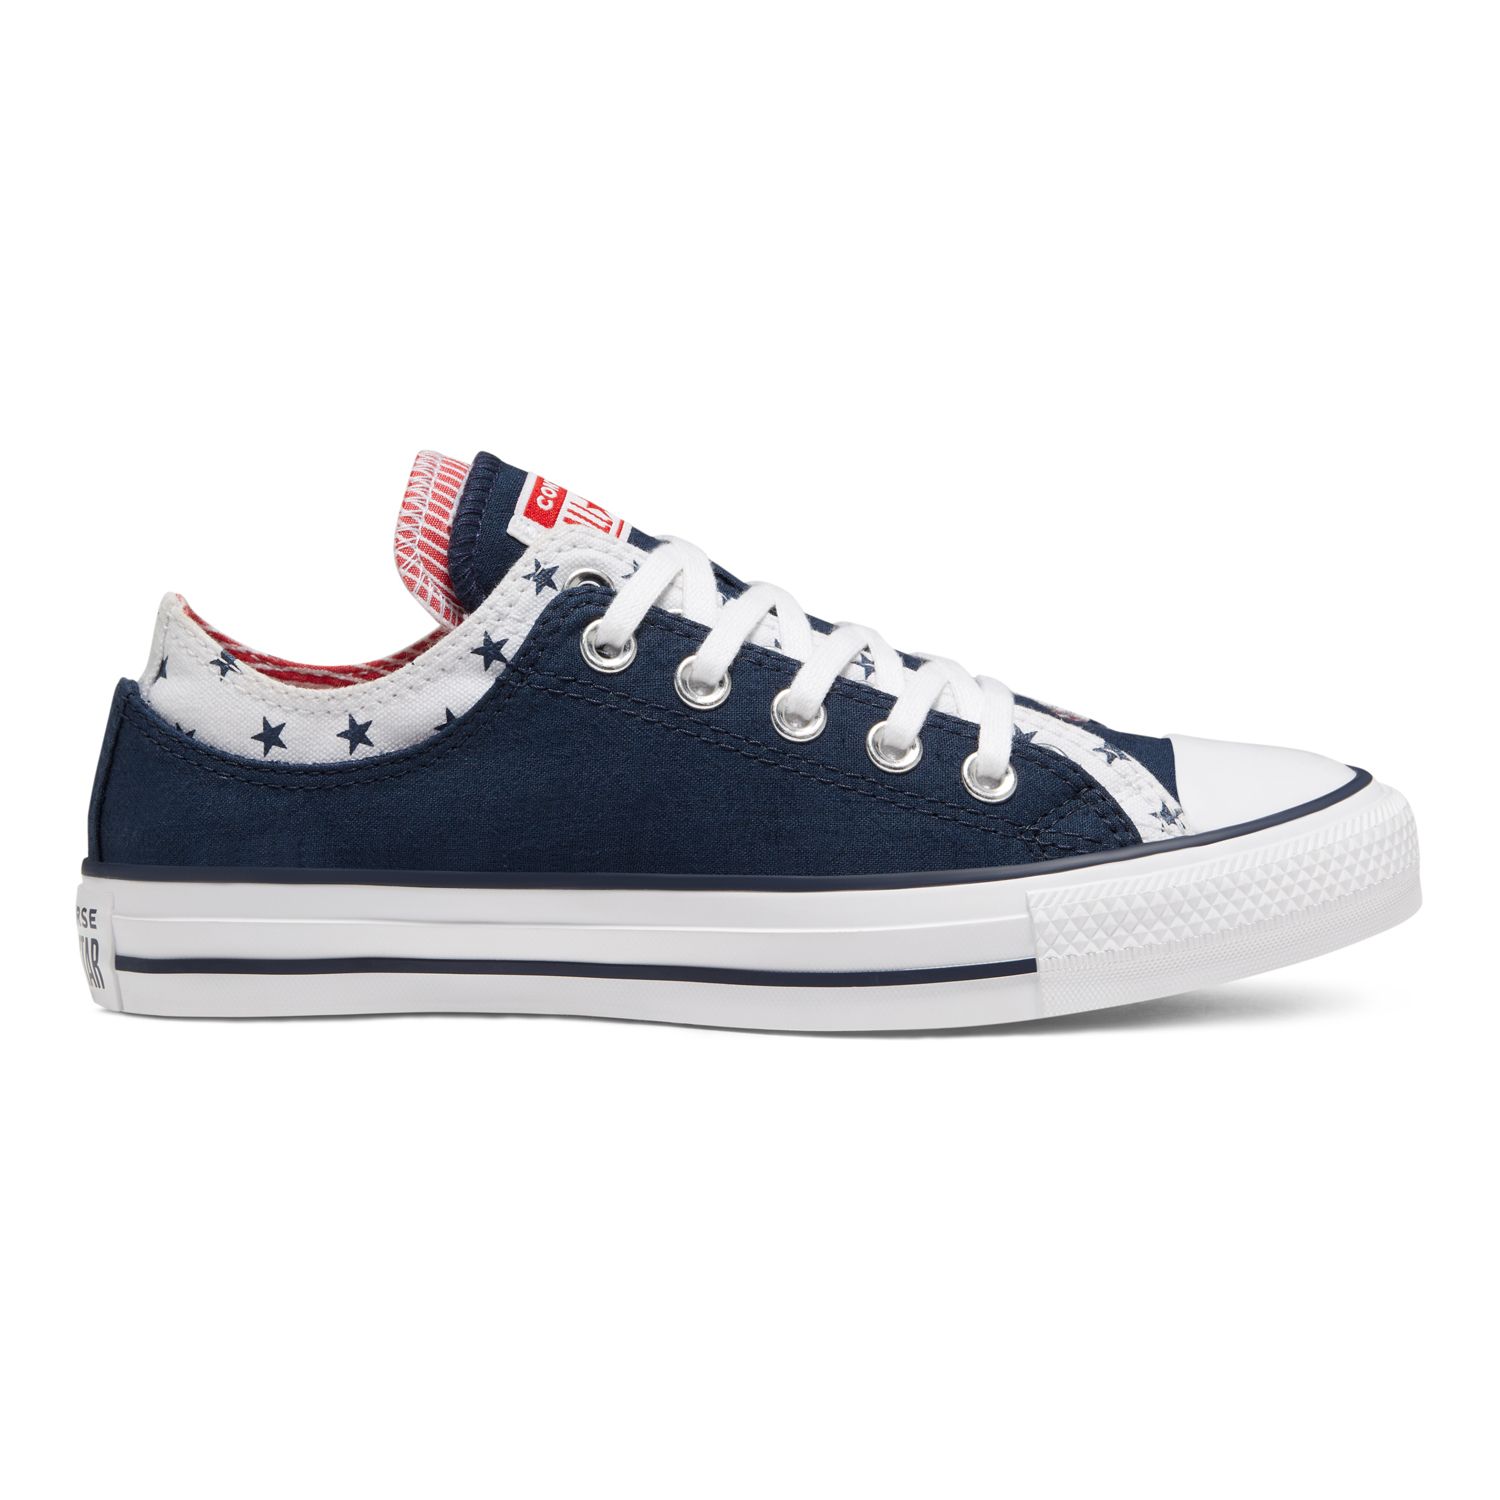 converse all star double upper high